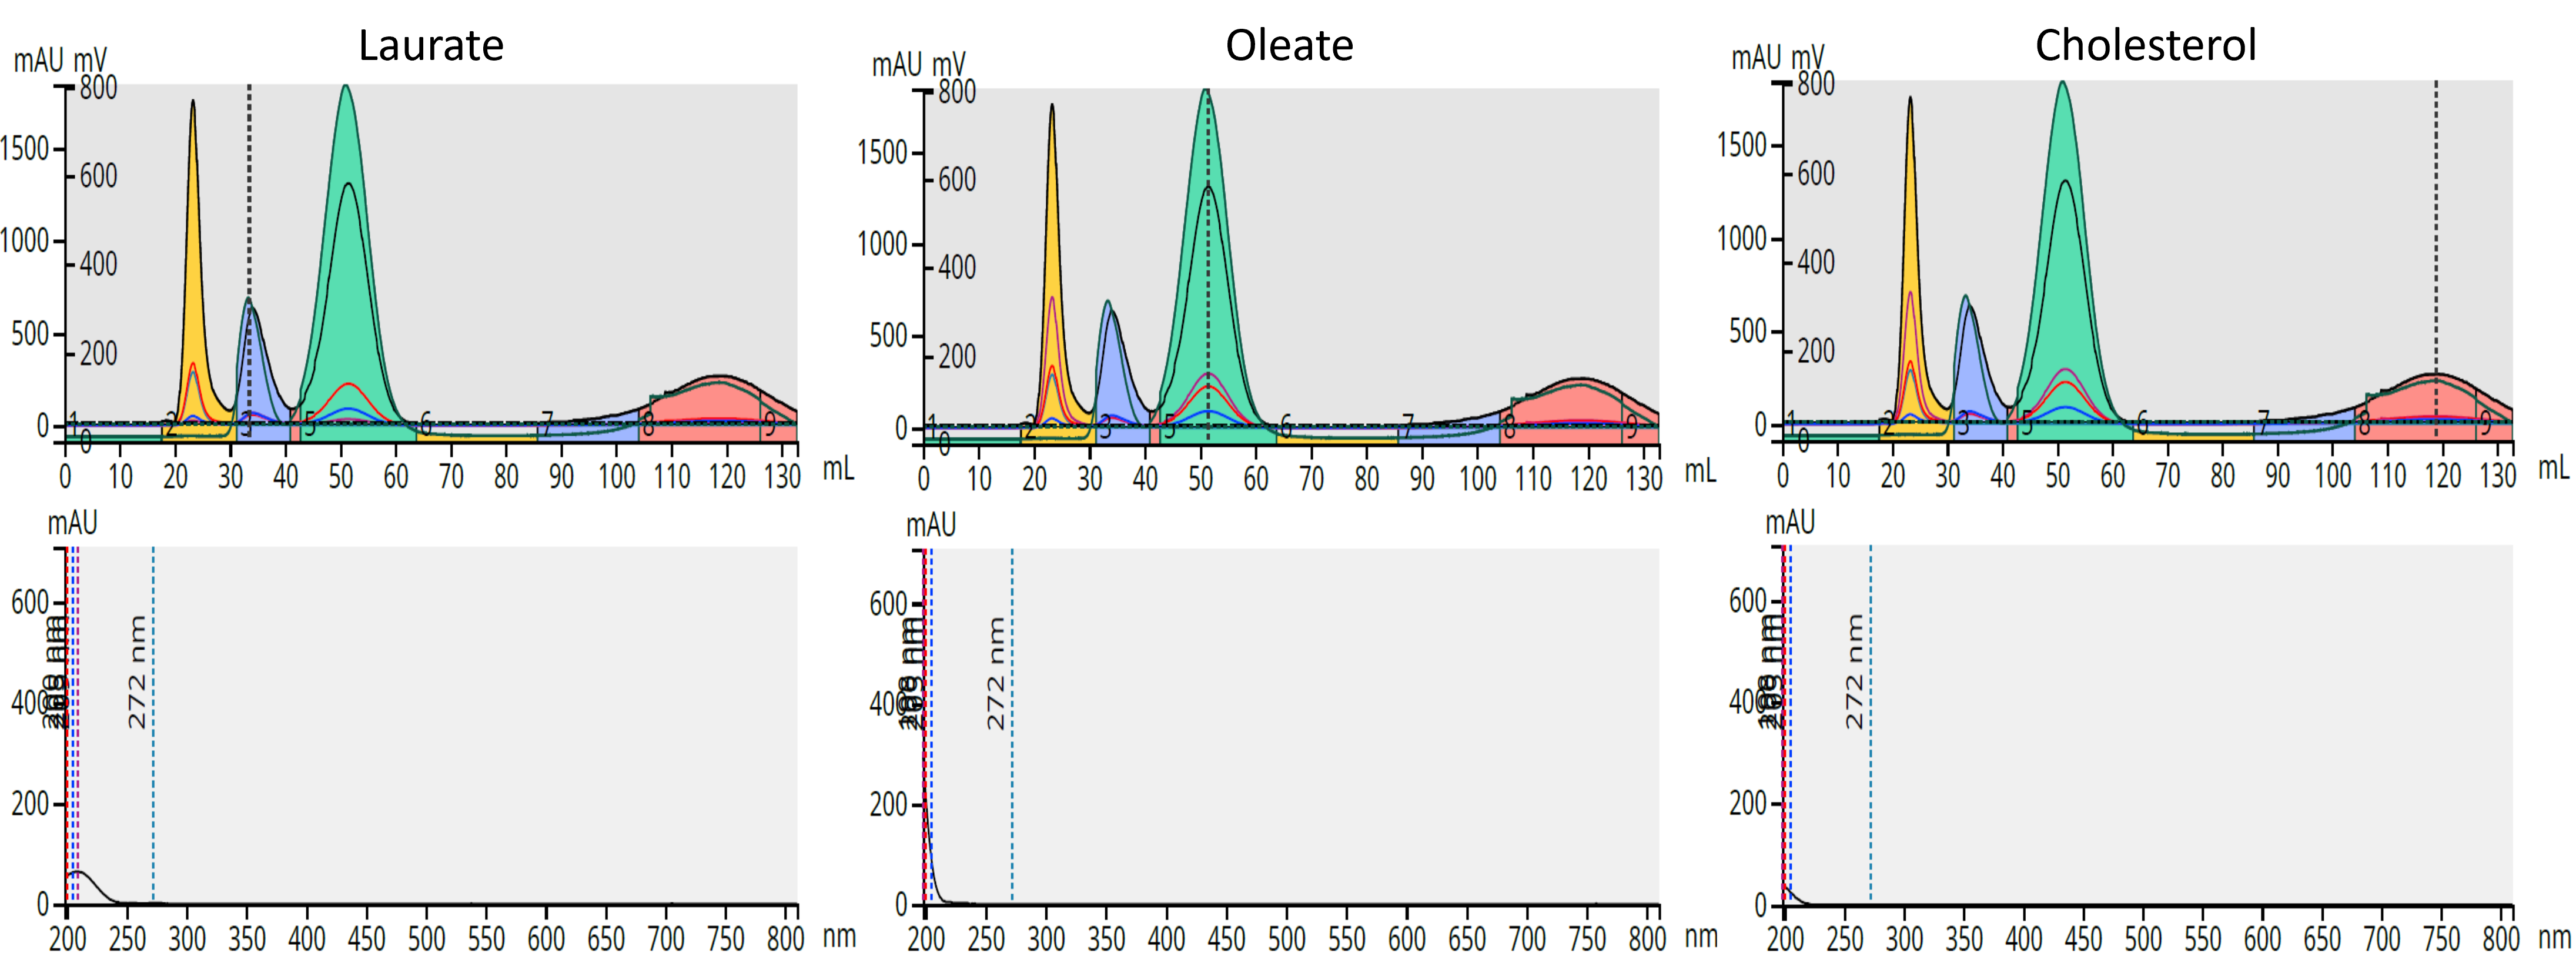 Laurate, oleate, cholesterol UV spectra